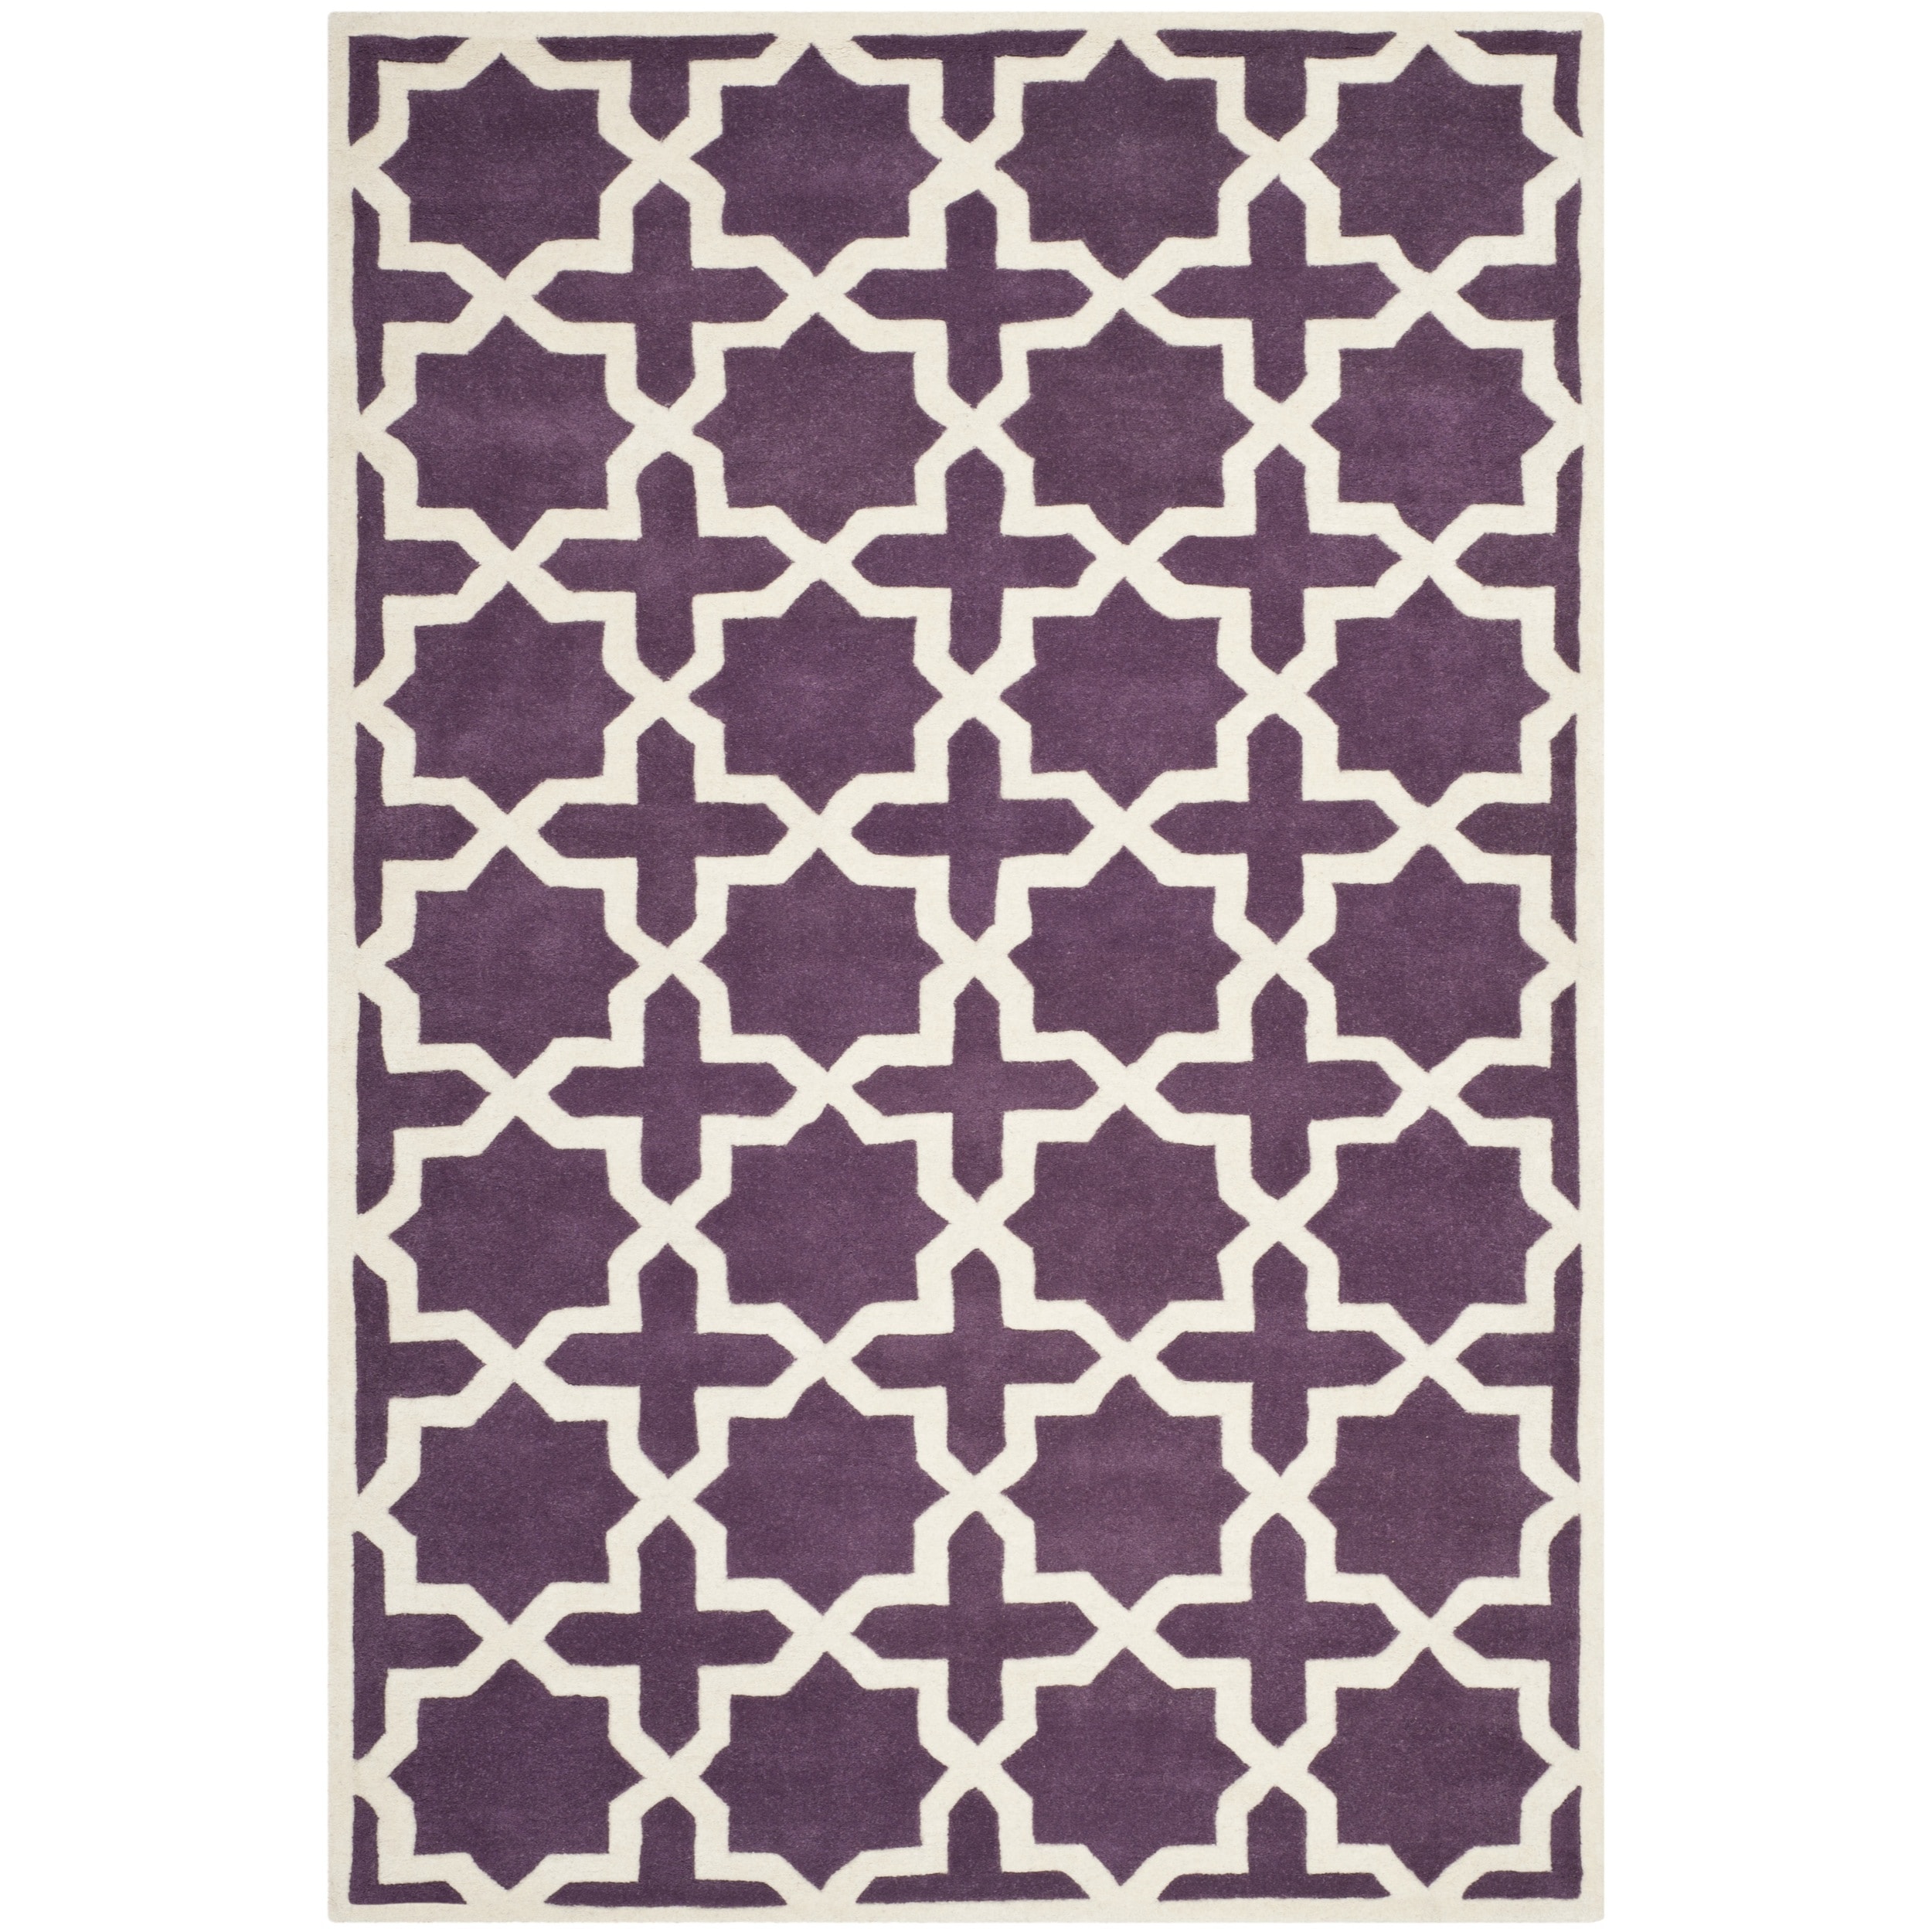 Handmade Moroccan Purple Wool Rug With Cotton Canvas Backing (6 X 9)